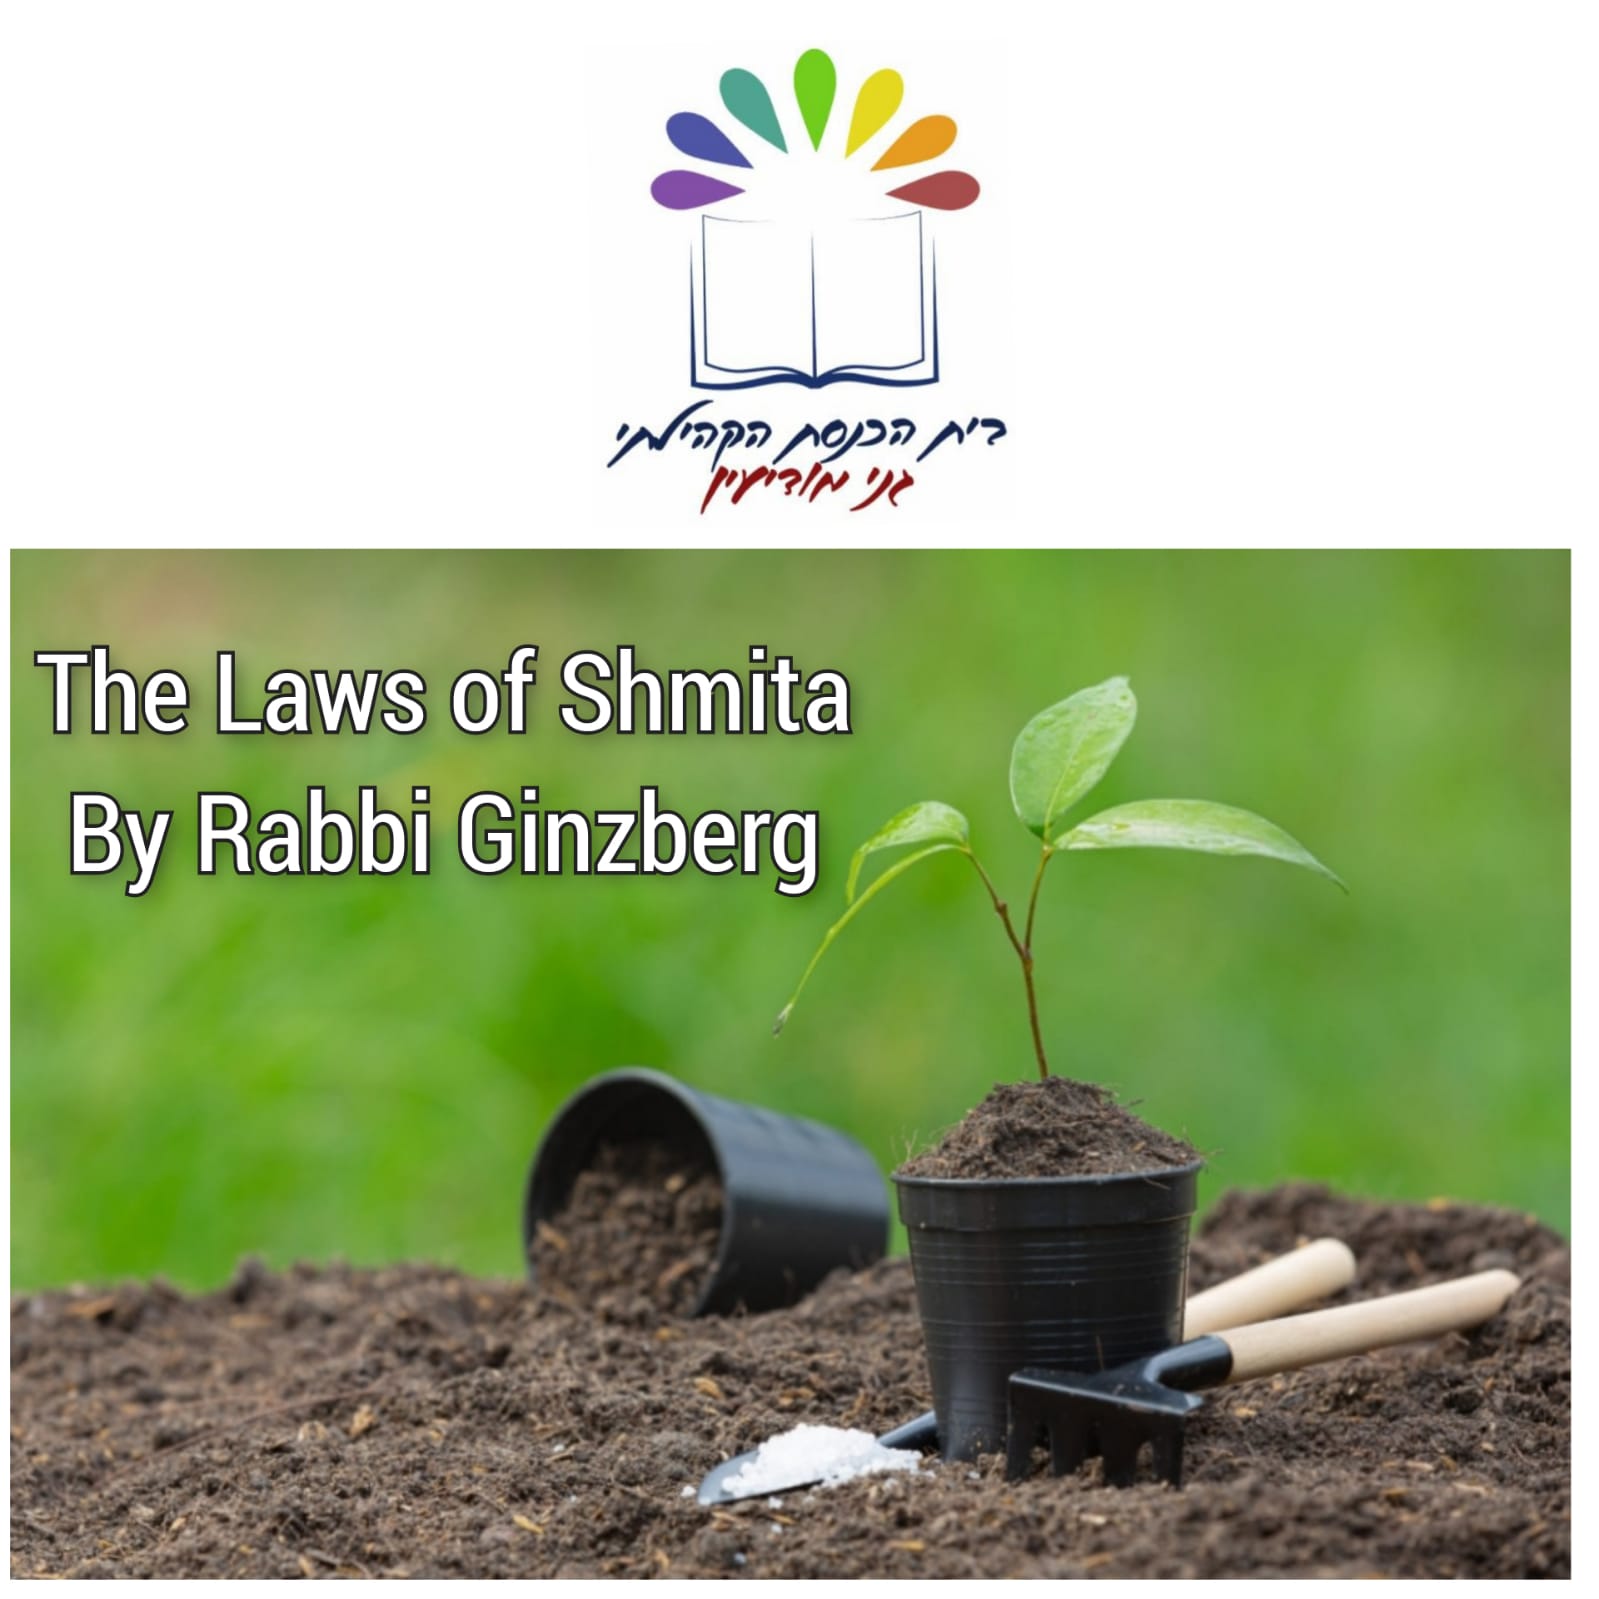 On Monday August 30th at 20:00 there will be a lecture by Rabbi Ginzberg about the laws of Shmita.
The lecture will be in english.